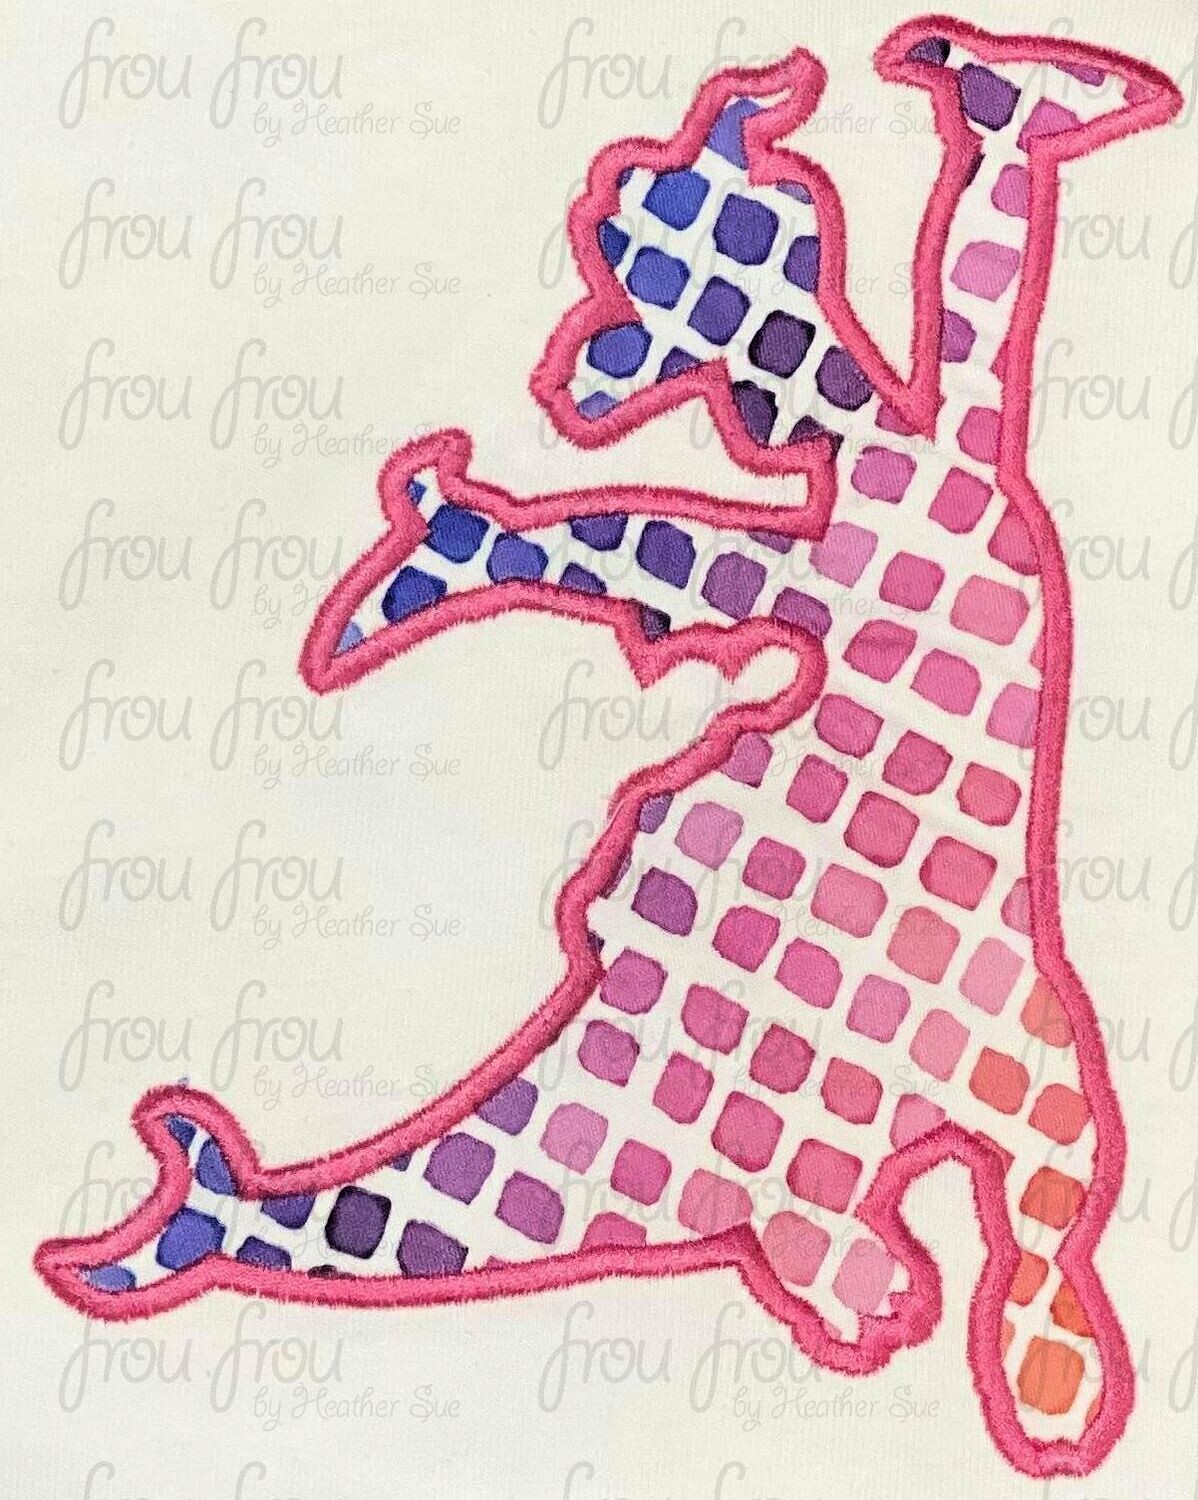 Imagination Dragon Silhouette Machine Applique and Filled Embroidery Design, Multiple sizes including 1